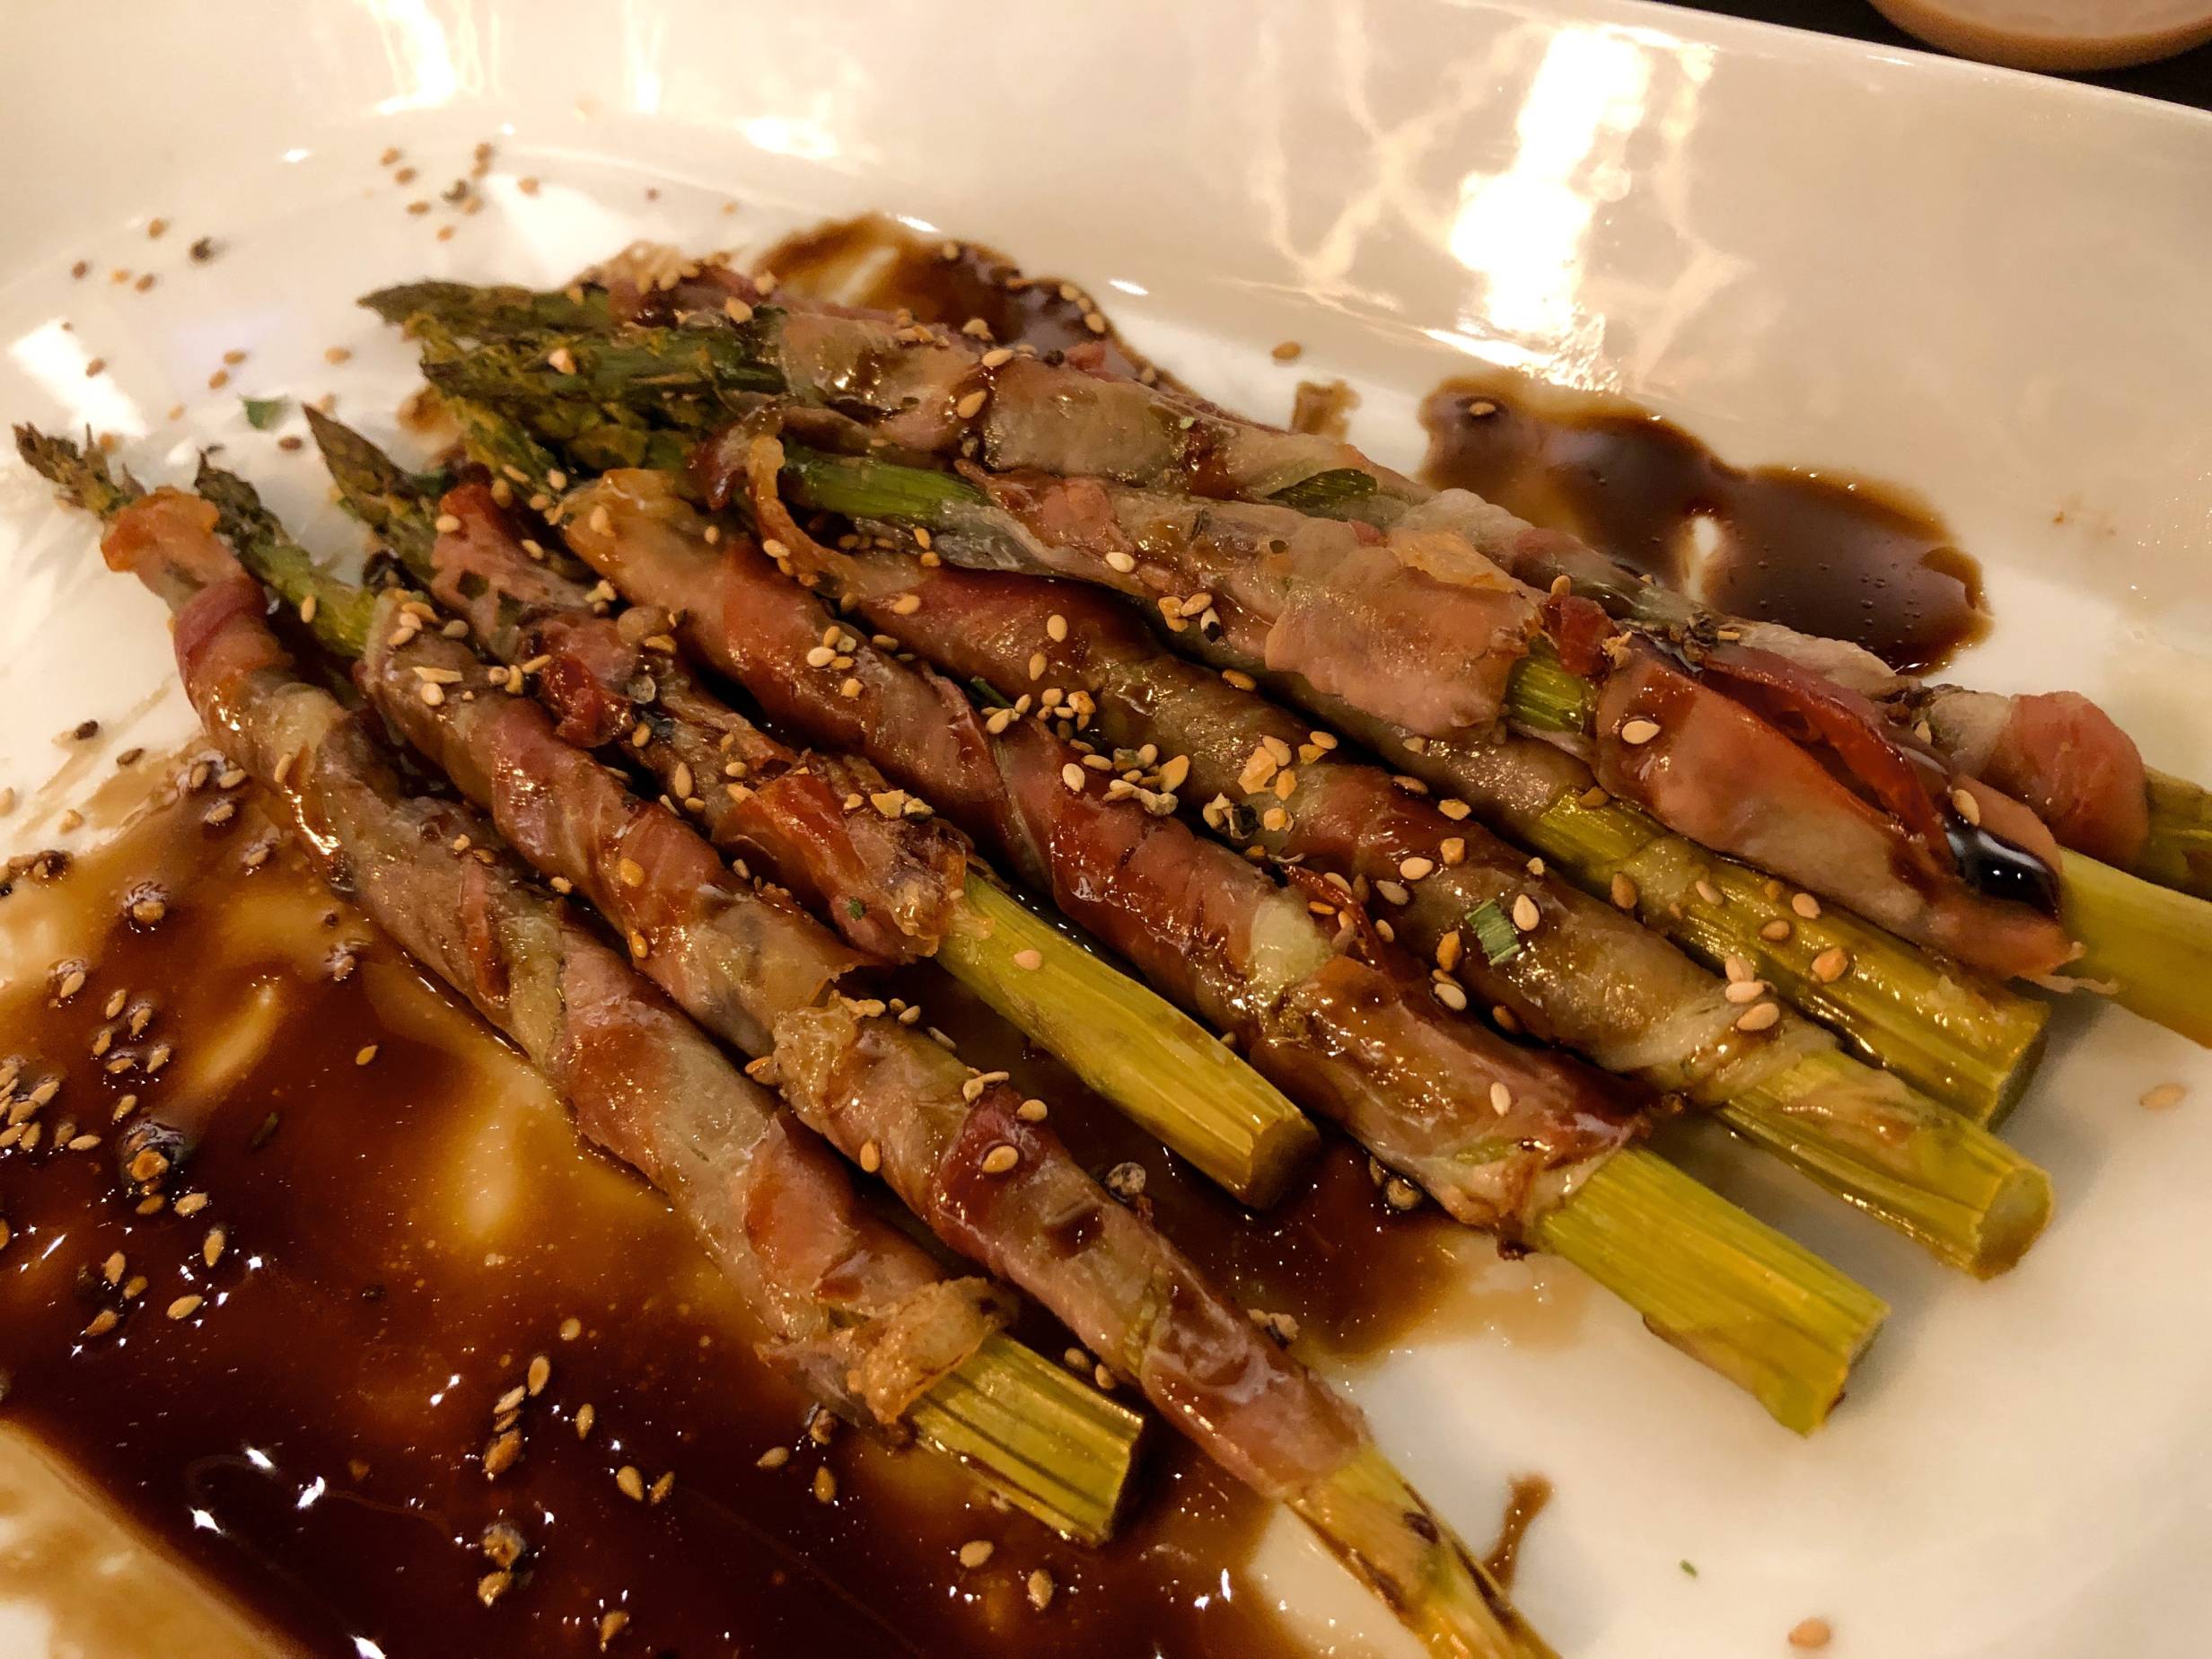 Image: Proscuitto-wrapped asparagus drizzled with balsamic vinegar and garnished with sesame seeds are served on white plate. The asparagus are a light green, and the vinegar is a thick, dark brown. Photo by Rebecca Wells. 